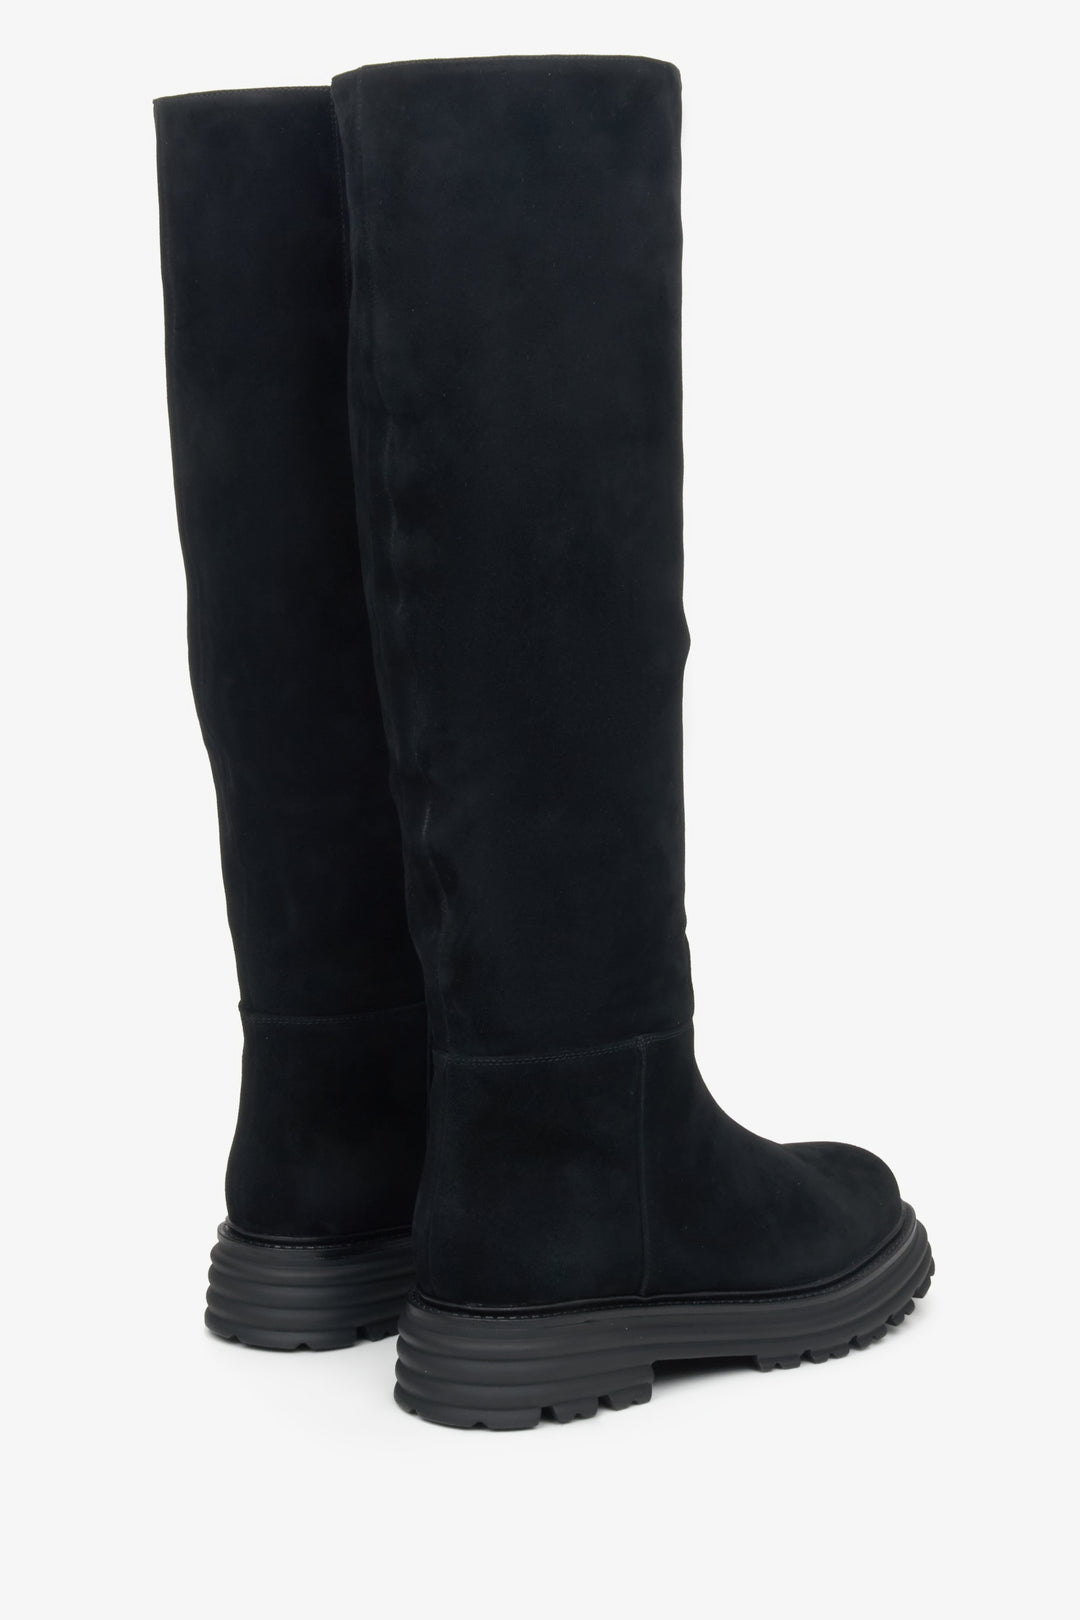 Black velour knee-high boots Estro for winter - close-up on shoe probile and upper.